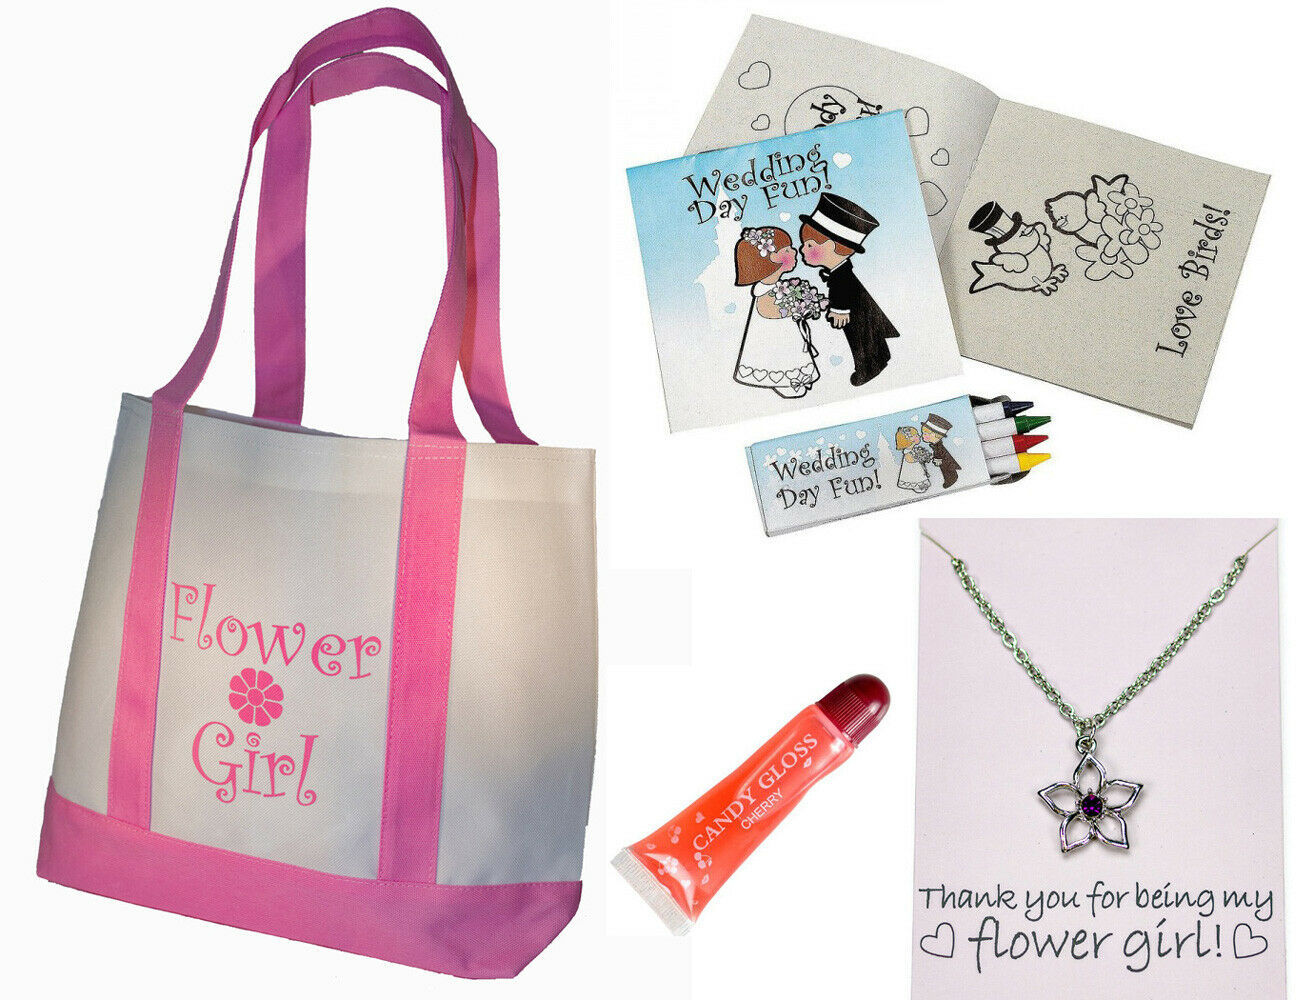 Best Flower Girl Gifts Set Tote Bag Necklace Lip Gloss Wedding Day Activity kits